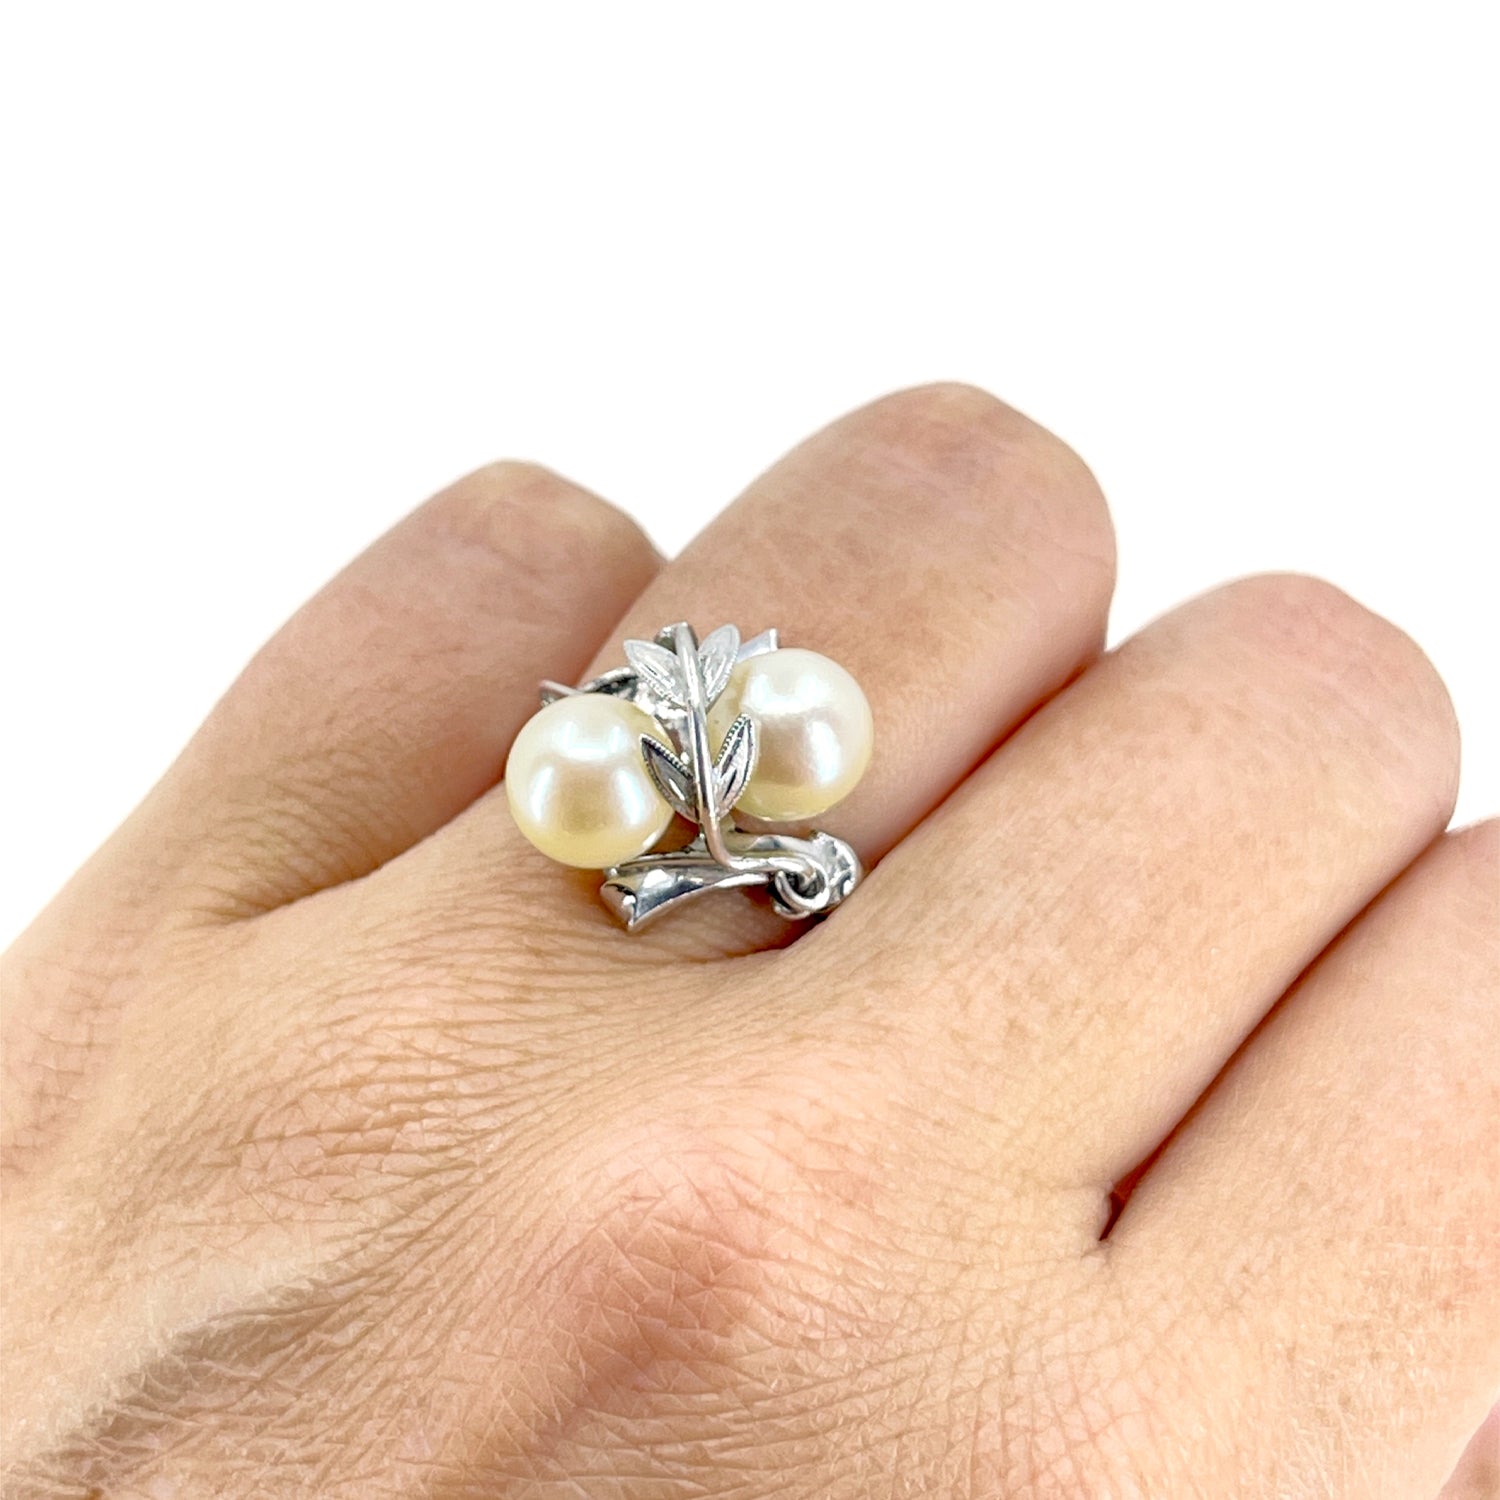 Maruwa Leafy Japanese Saltwater Akoya Cultured Double Pearl Ring- Sterling Silver Sz 8